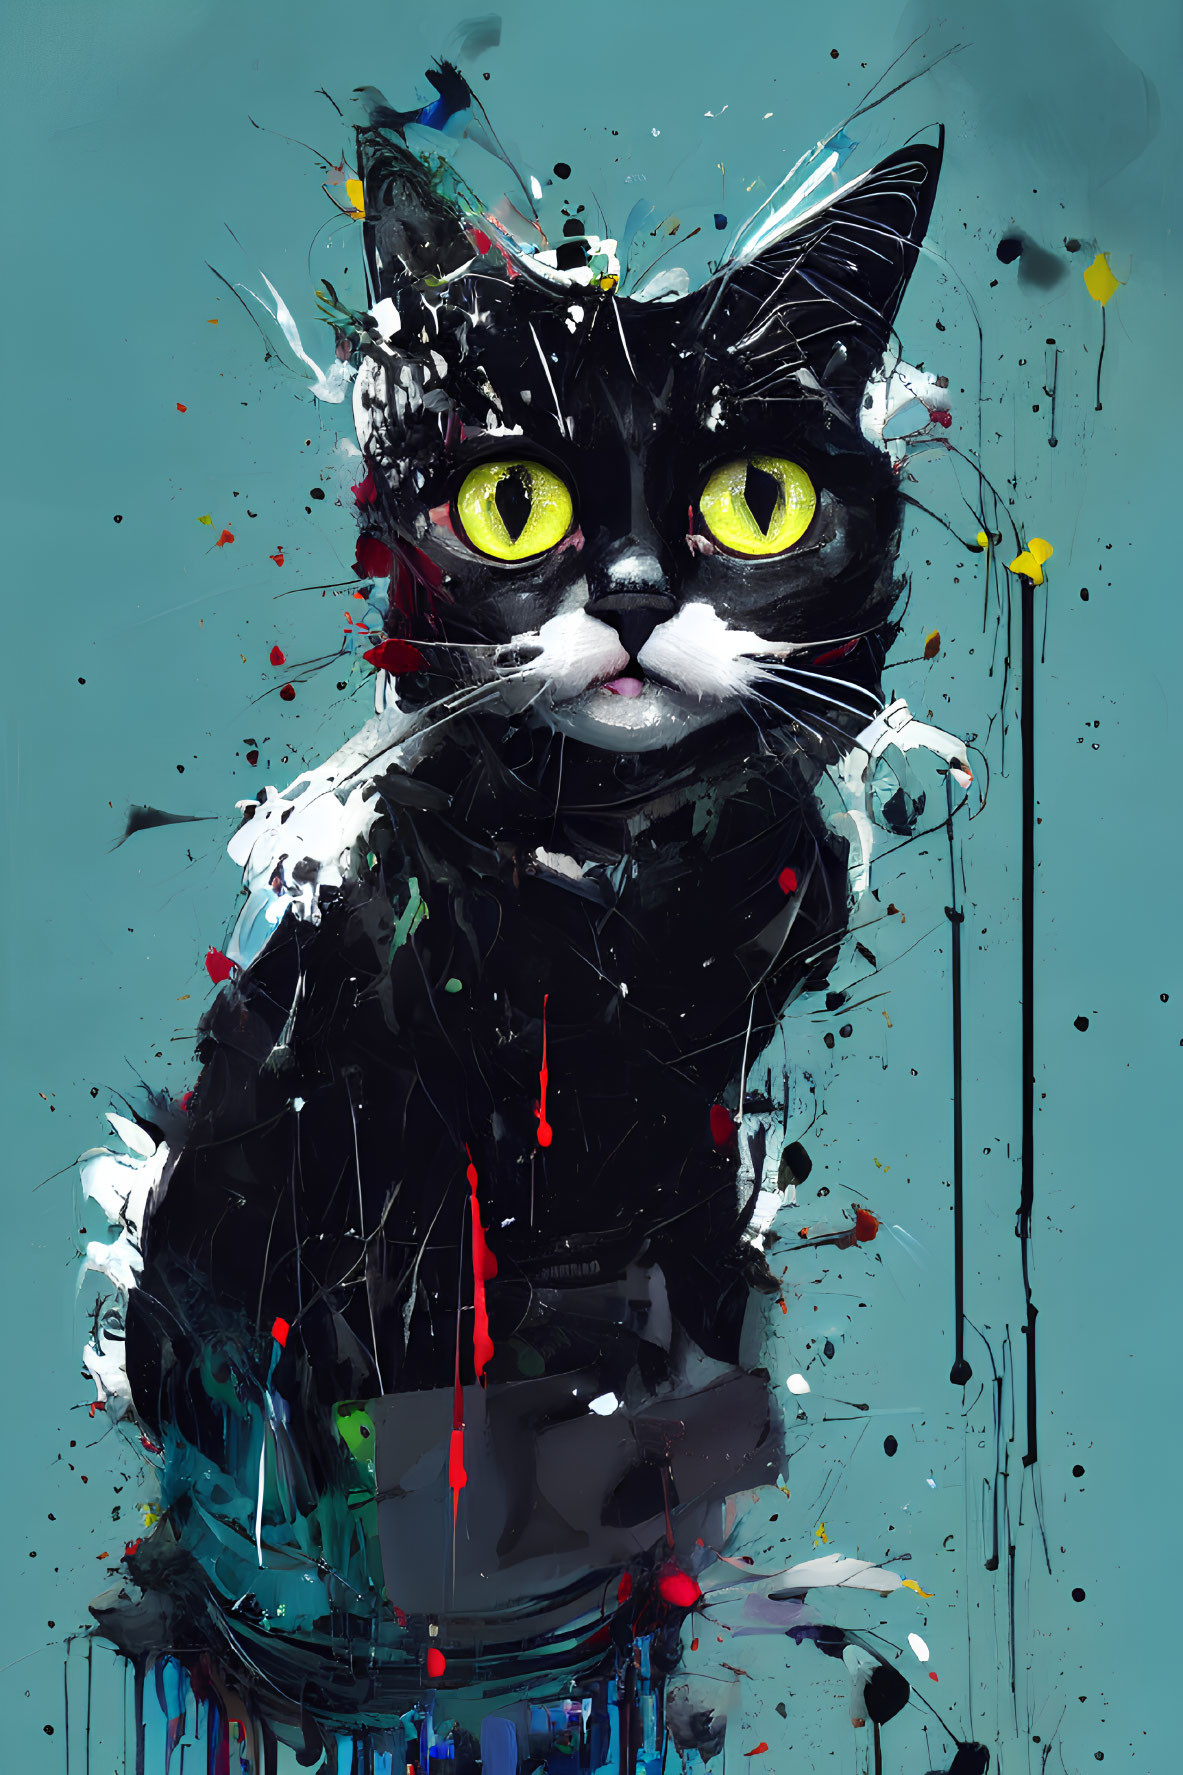 Vibrant abstract painting of a black cat with yellow eyes